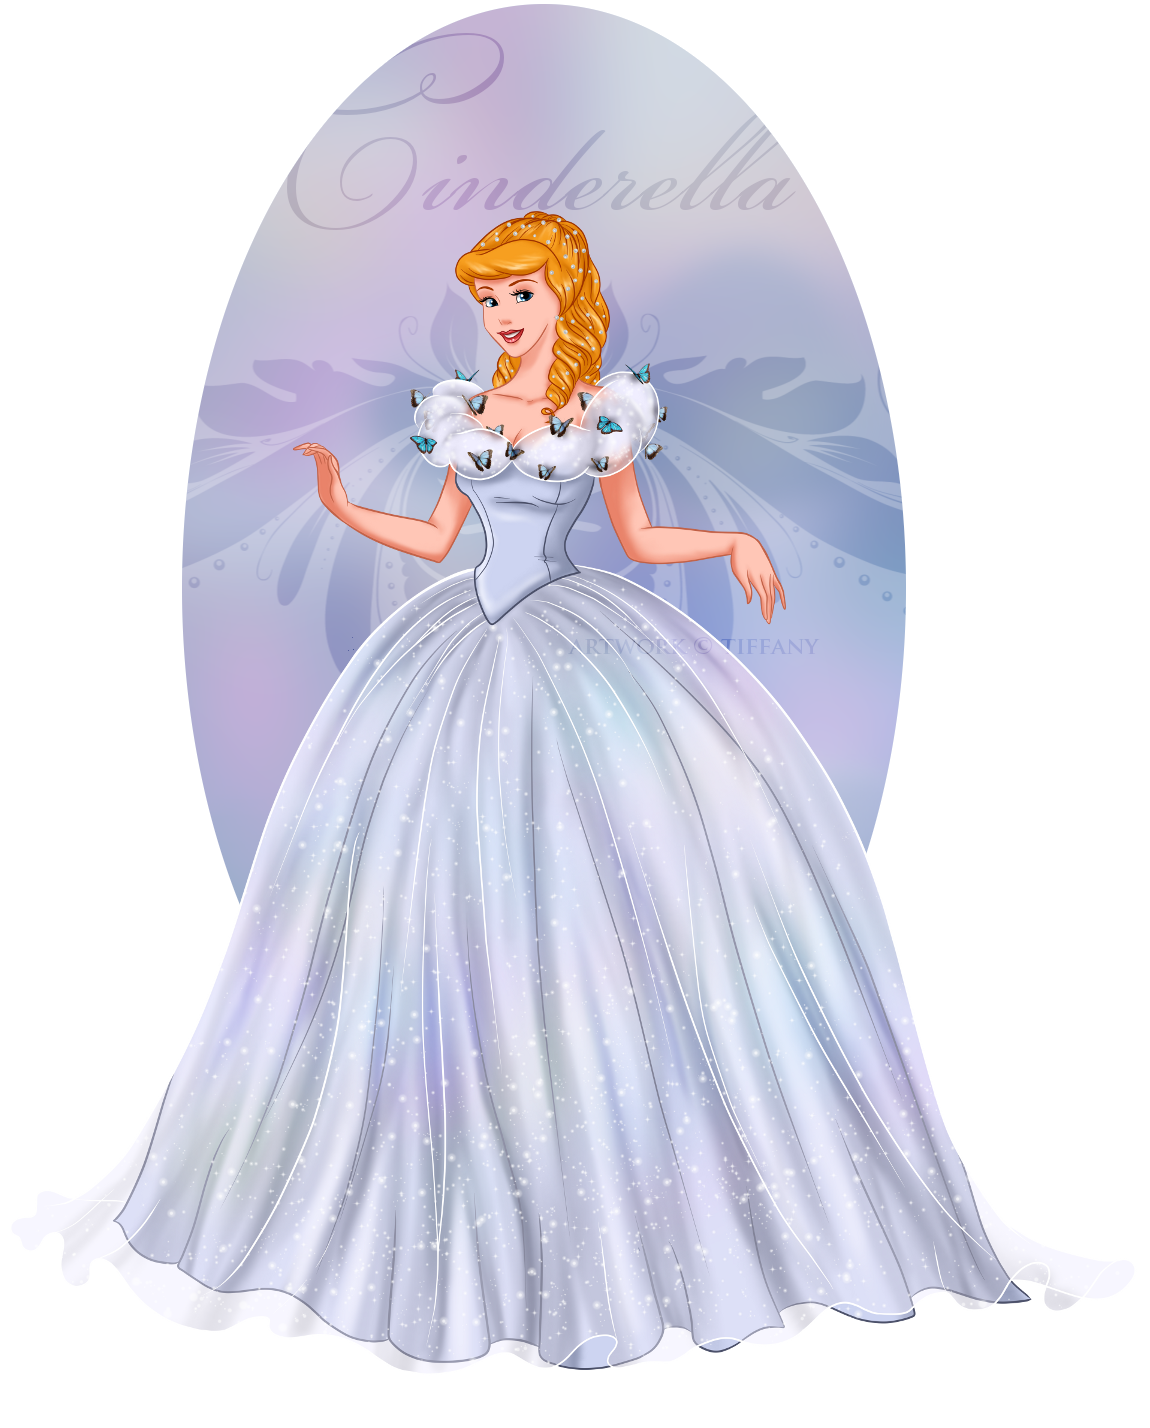 the Butterfly Ballgown